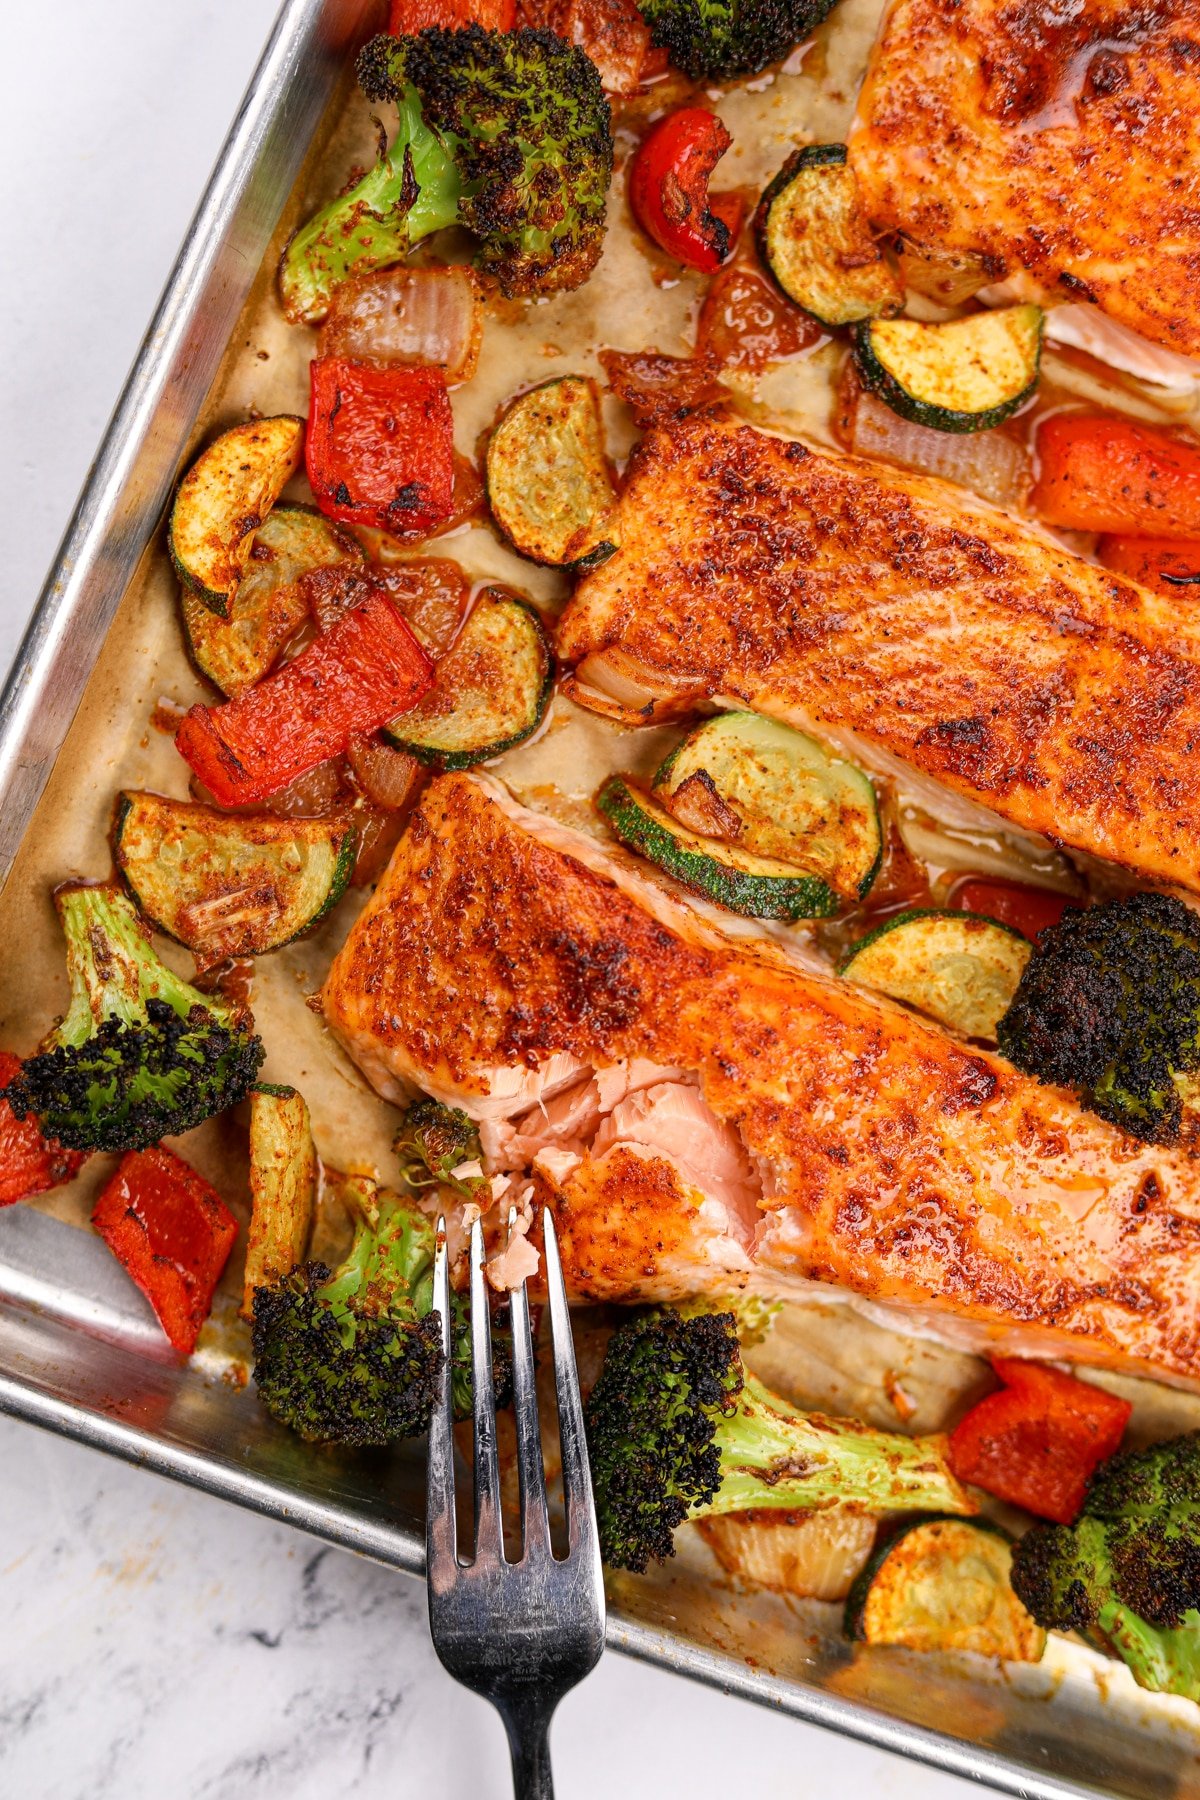 A fork flaking a fillet of salmon, surrounded by various vegetables including broccoli, bell pepper, and zucchini.